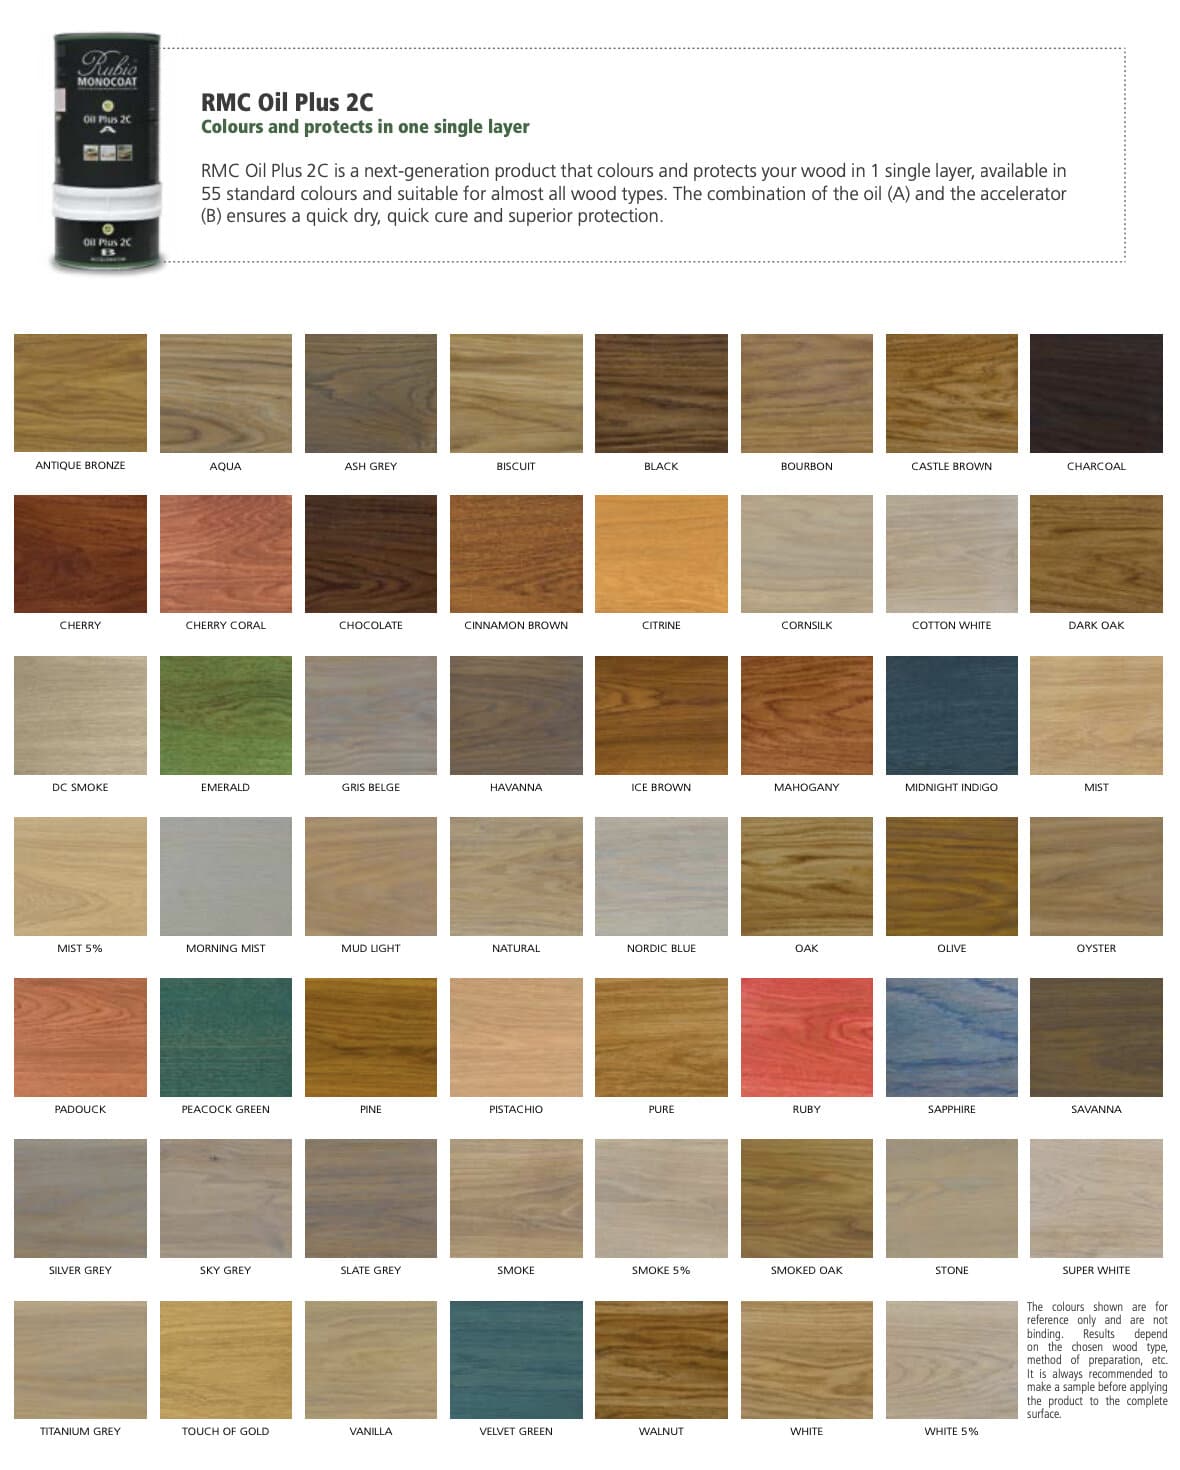 rubio monocoat colors chart showing each oil color available through Rubio Monocoat